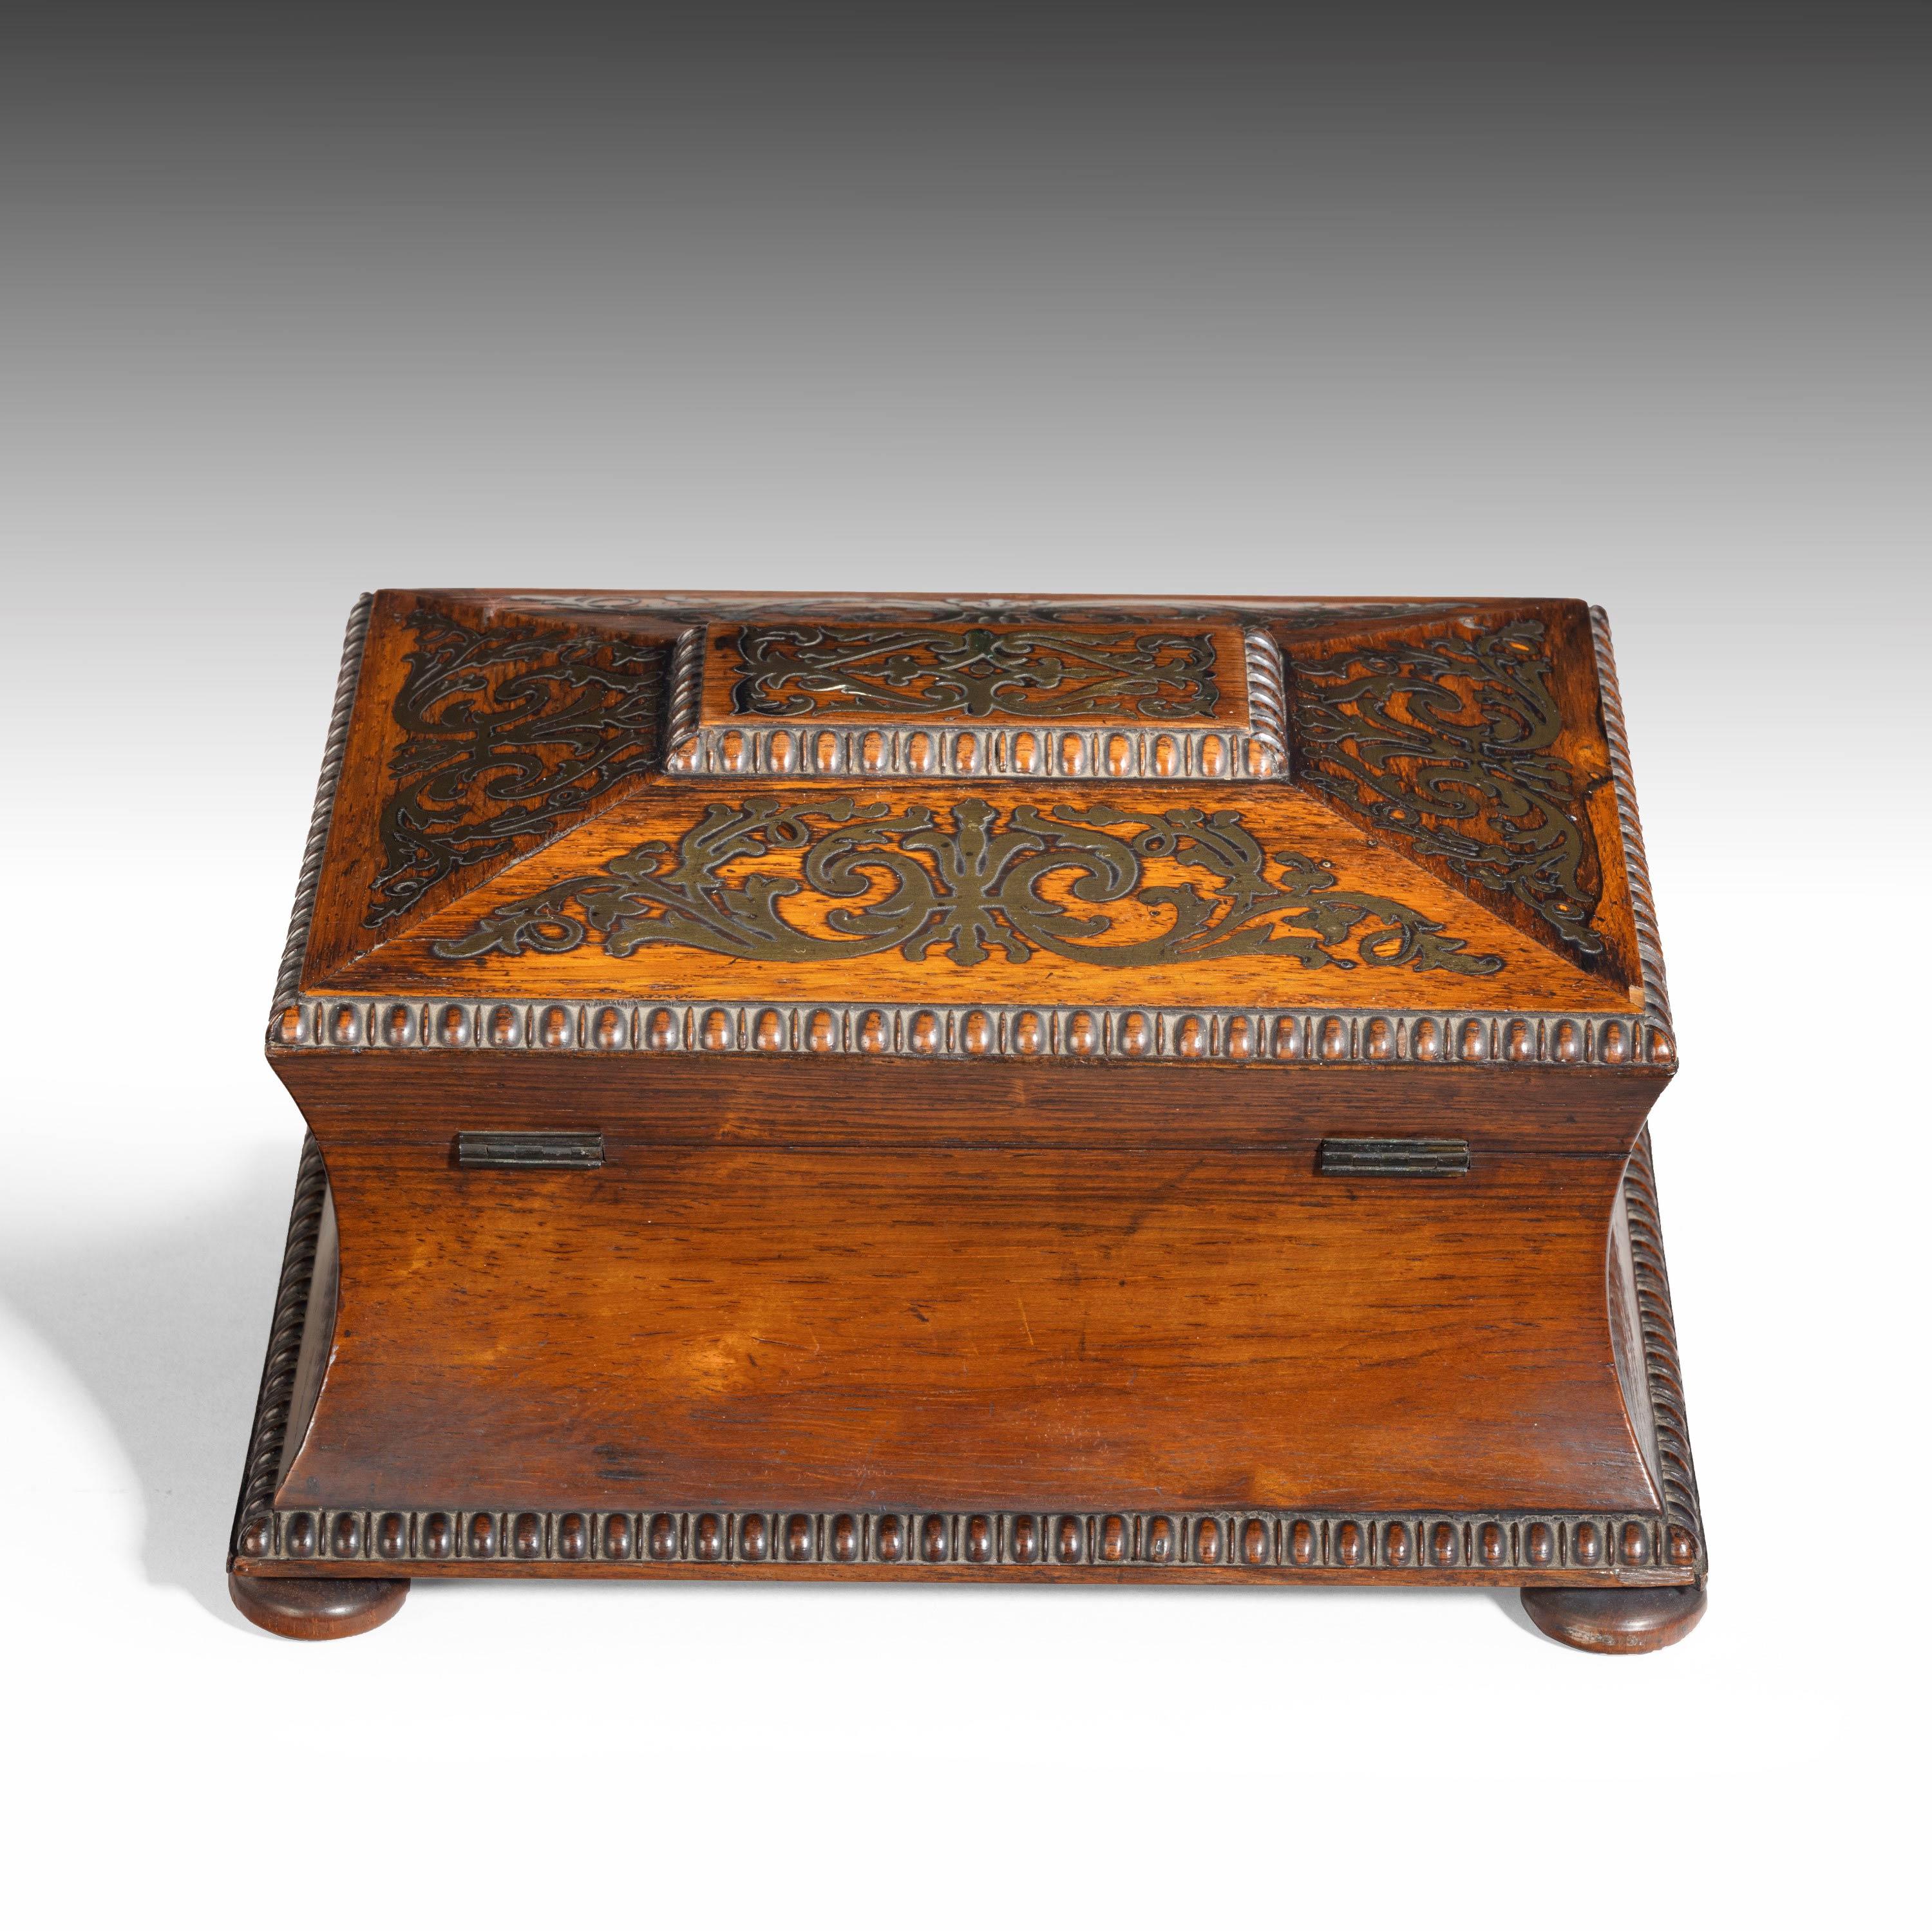 English Exceptionally Fine Regency Period Waisted and Flared Brass Inlaid Caddy For Sale